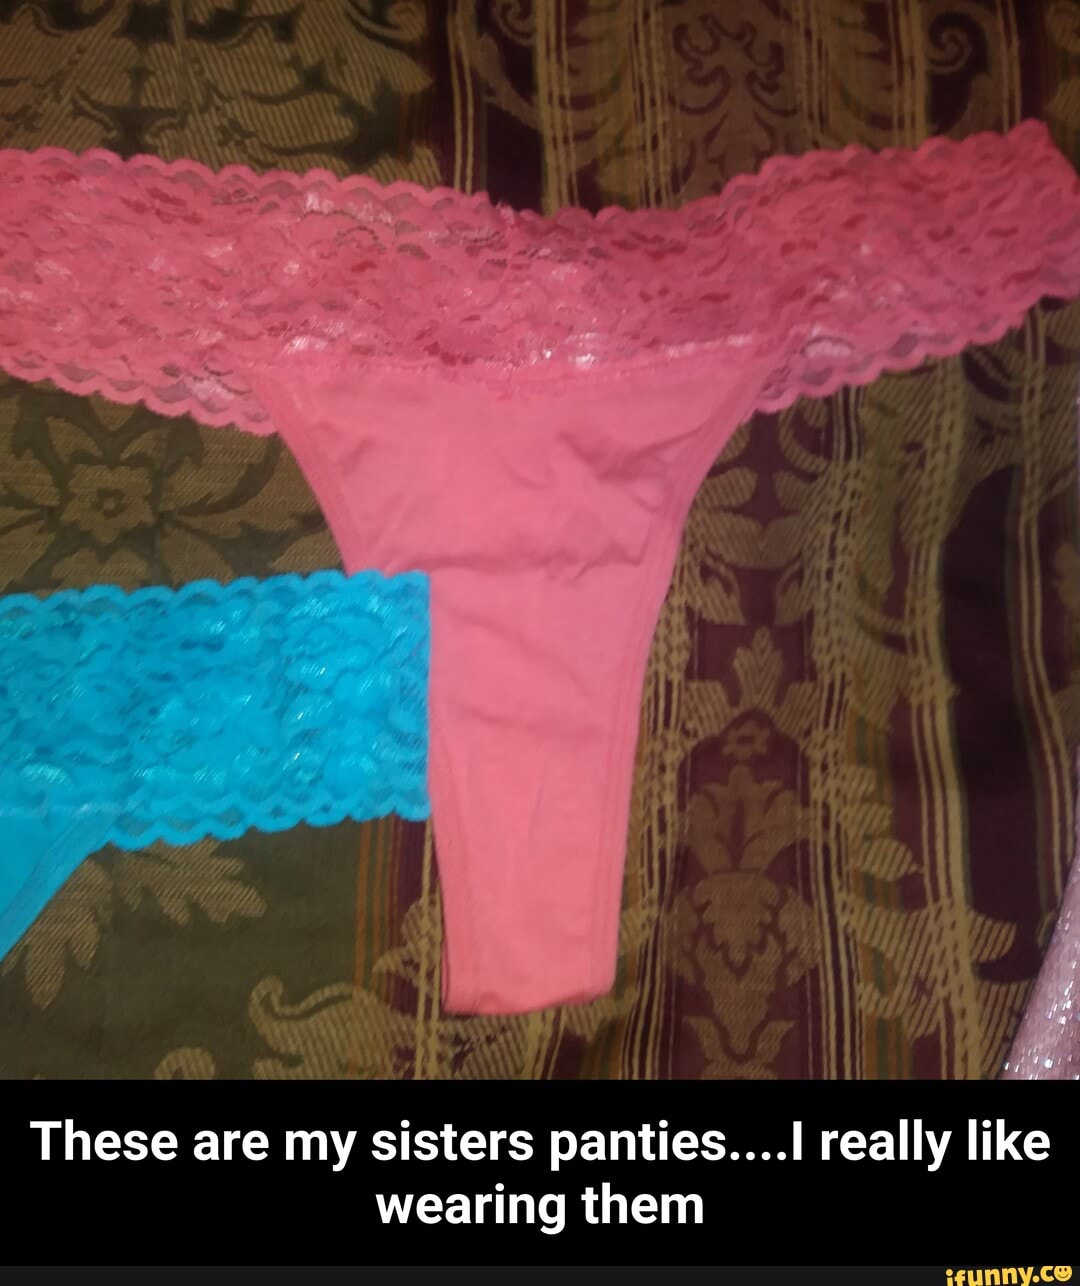 Eally like r These are my sisters panties.l them wearing - These are my sisters  panties.I really like wearing them - iFunny Brazil